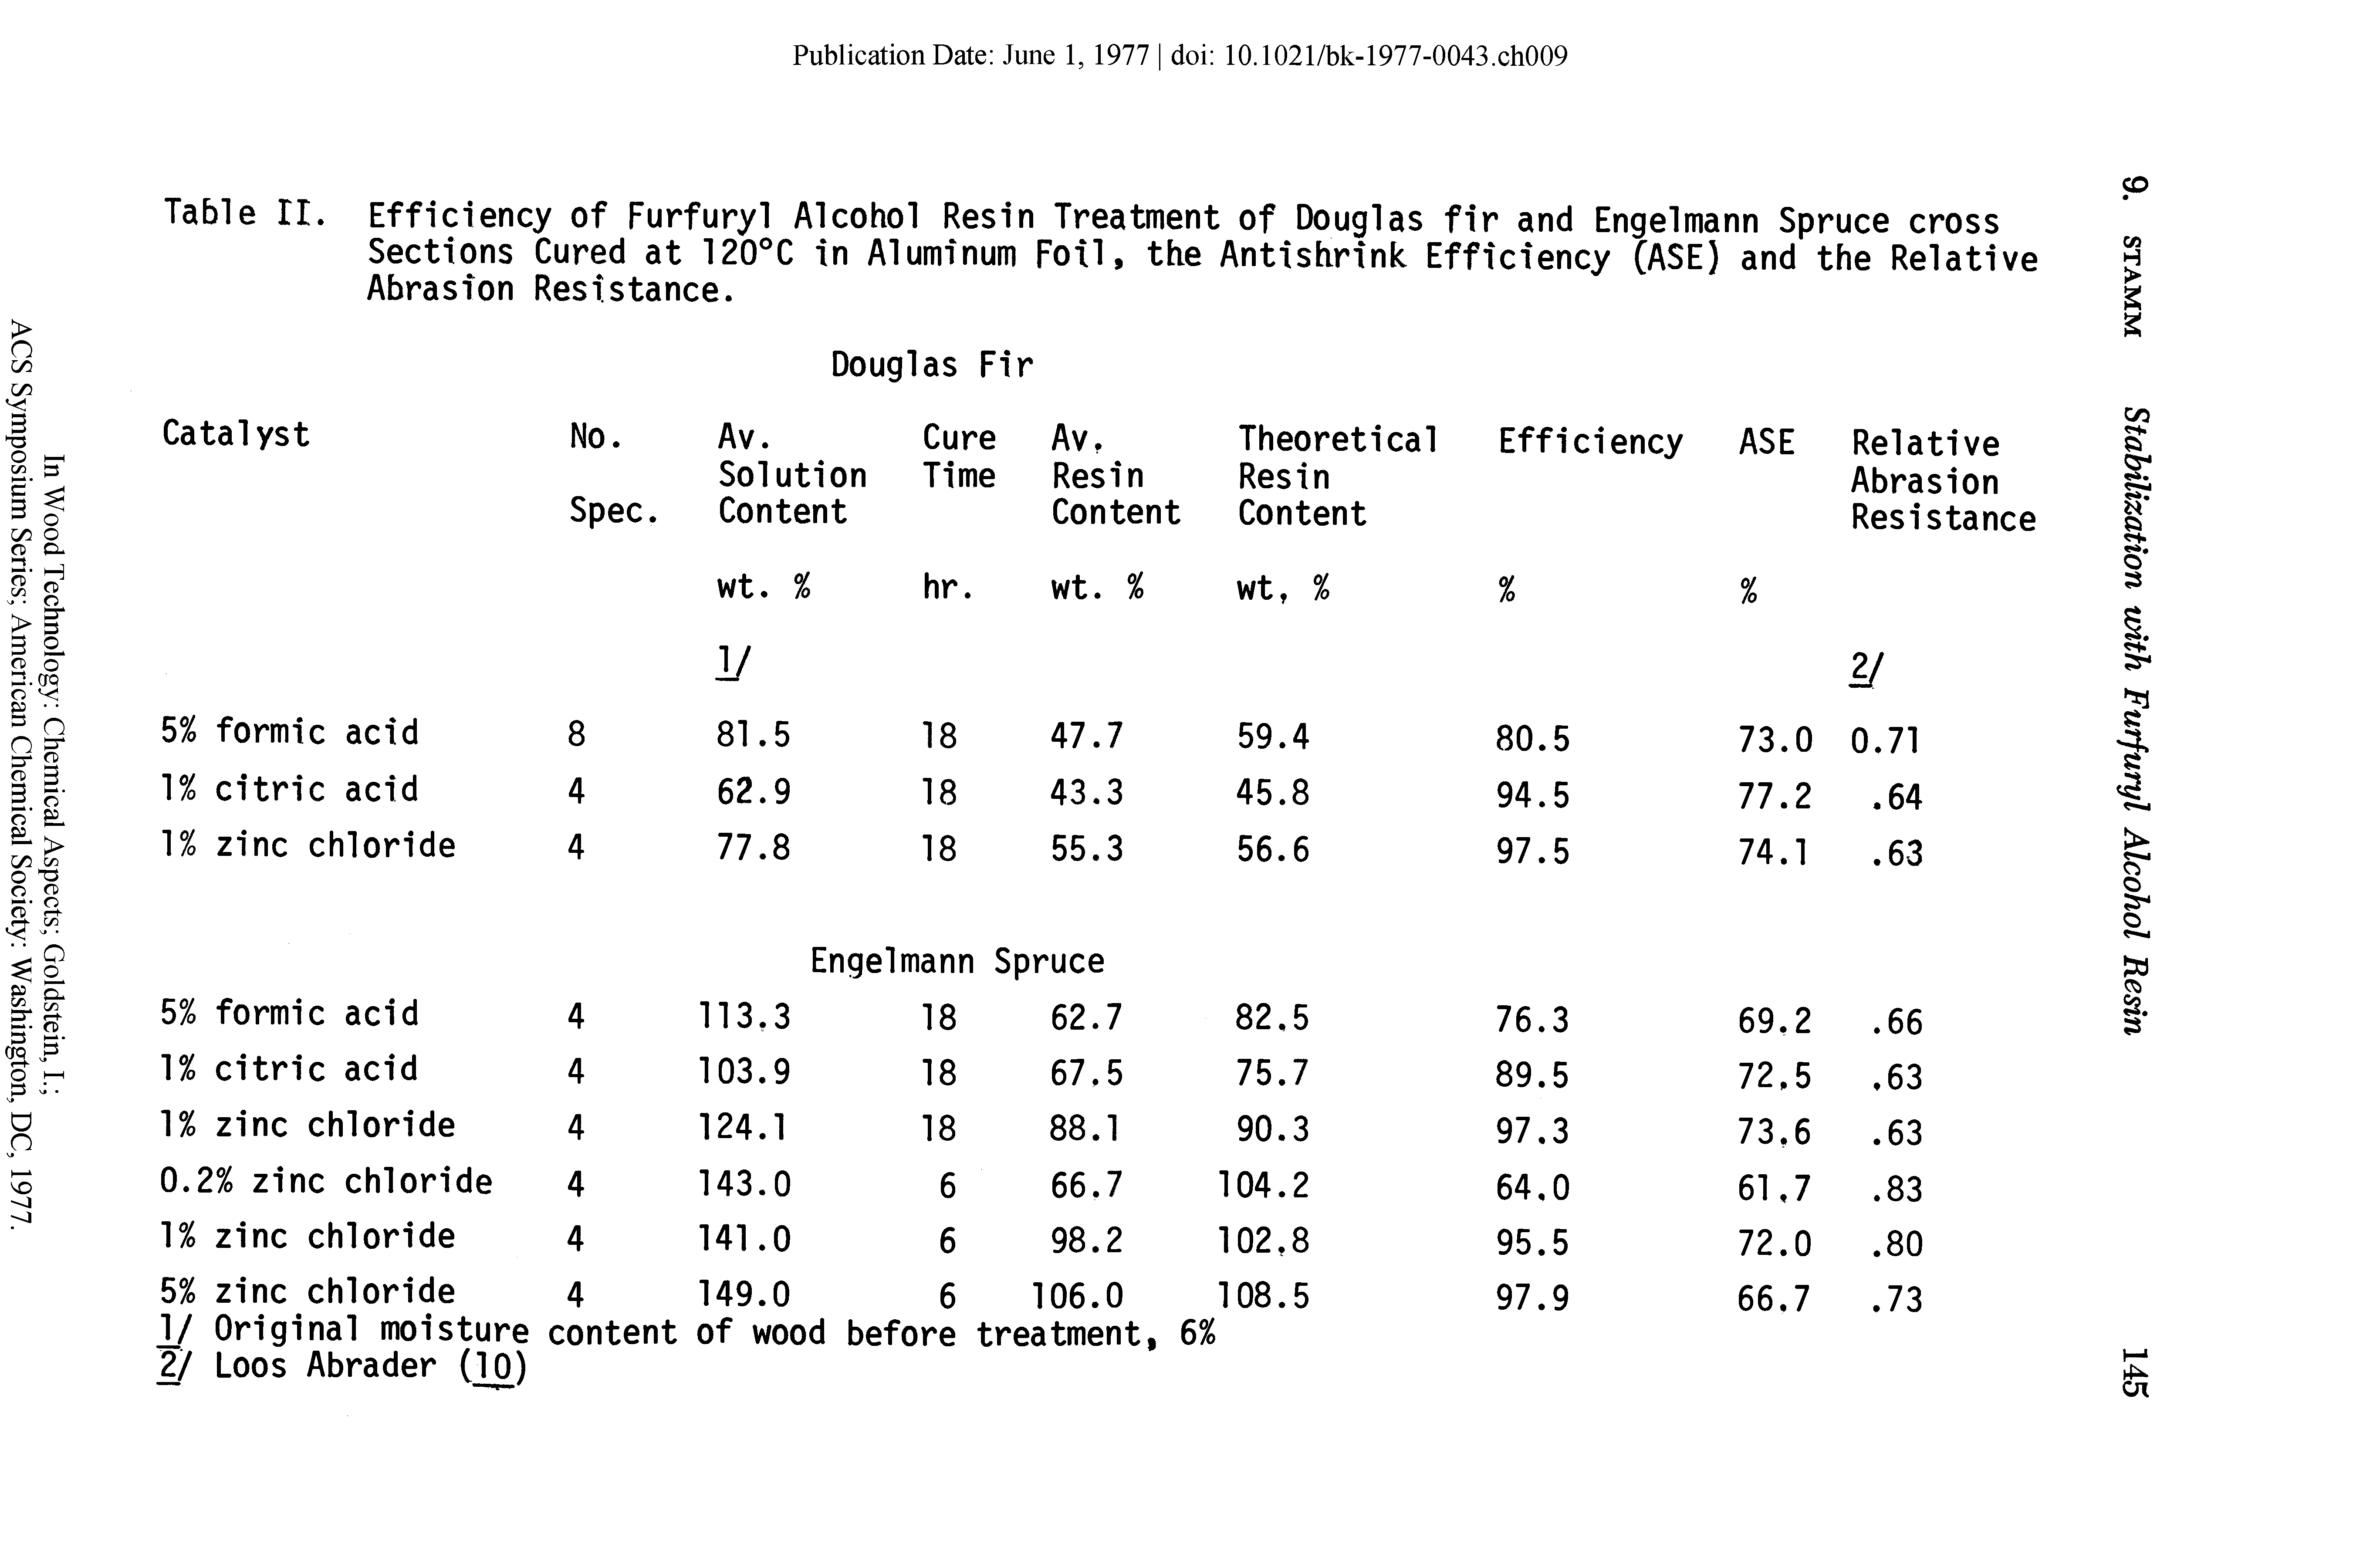 Table II. Efficiency of Furfuryl Alcohol Resin Treatment of Douglas fir and Engelmann Spruce cross Sections Cured at 120°C in Aluminum Foil, the Antishrink Efficiency CASE) and the Relative Abrasion Resistance.